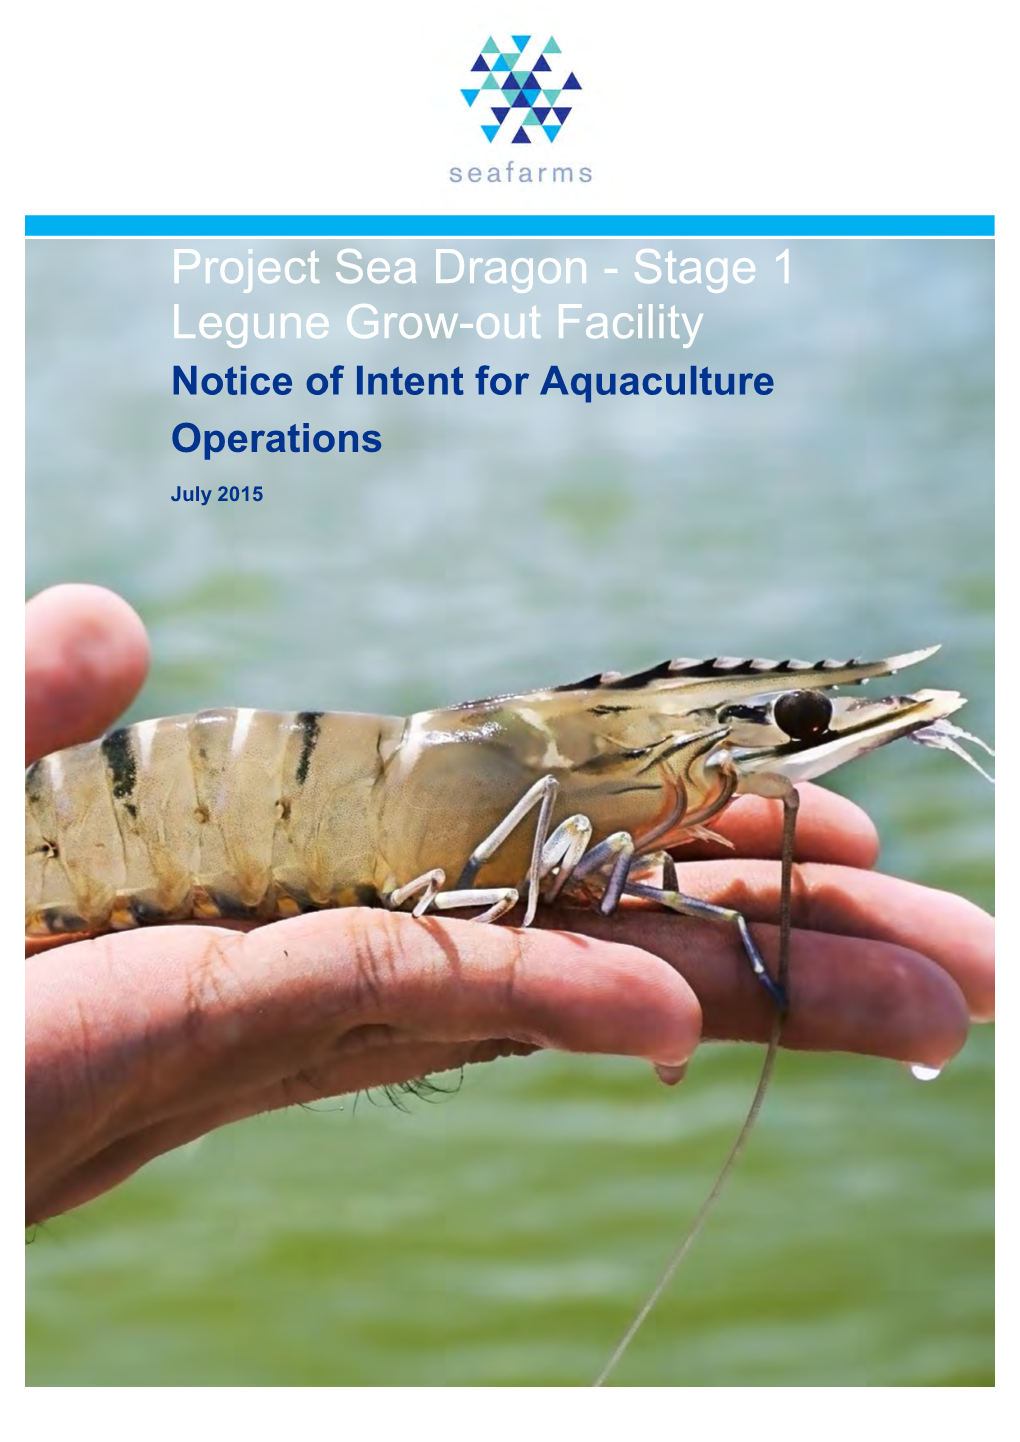 Project Sea Dragon - Stage 1 Legune Grow-Out Facility Notice of Intent for Aquaculture Operations